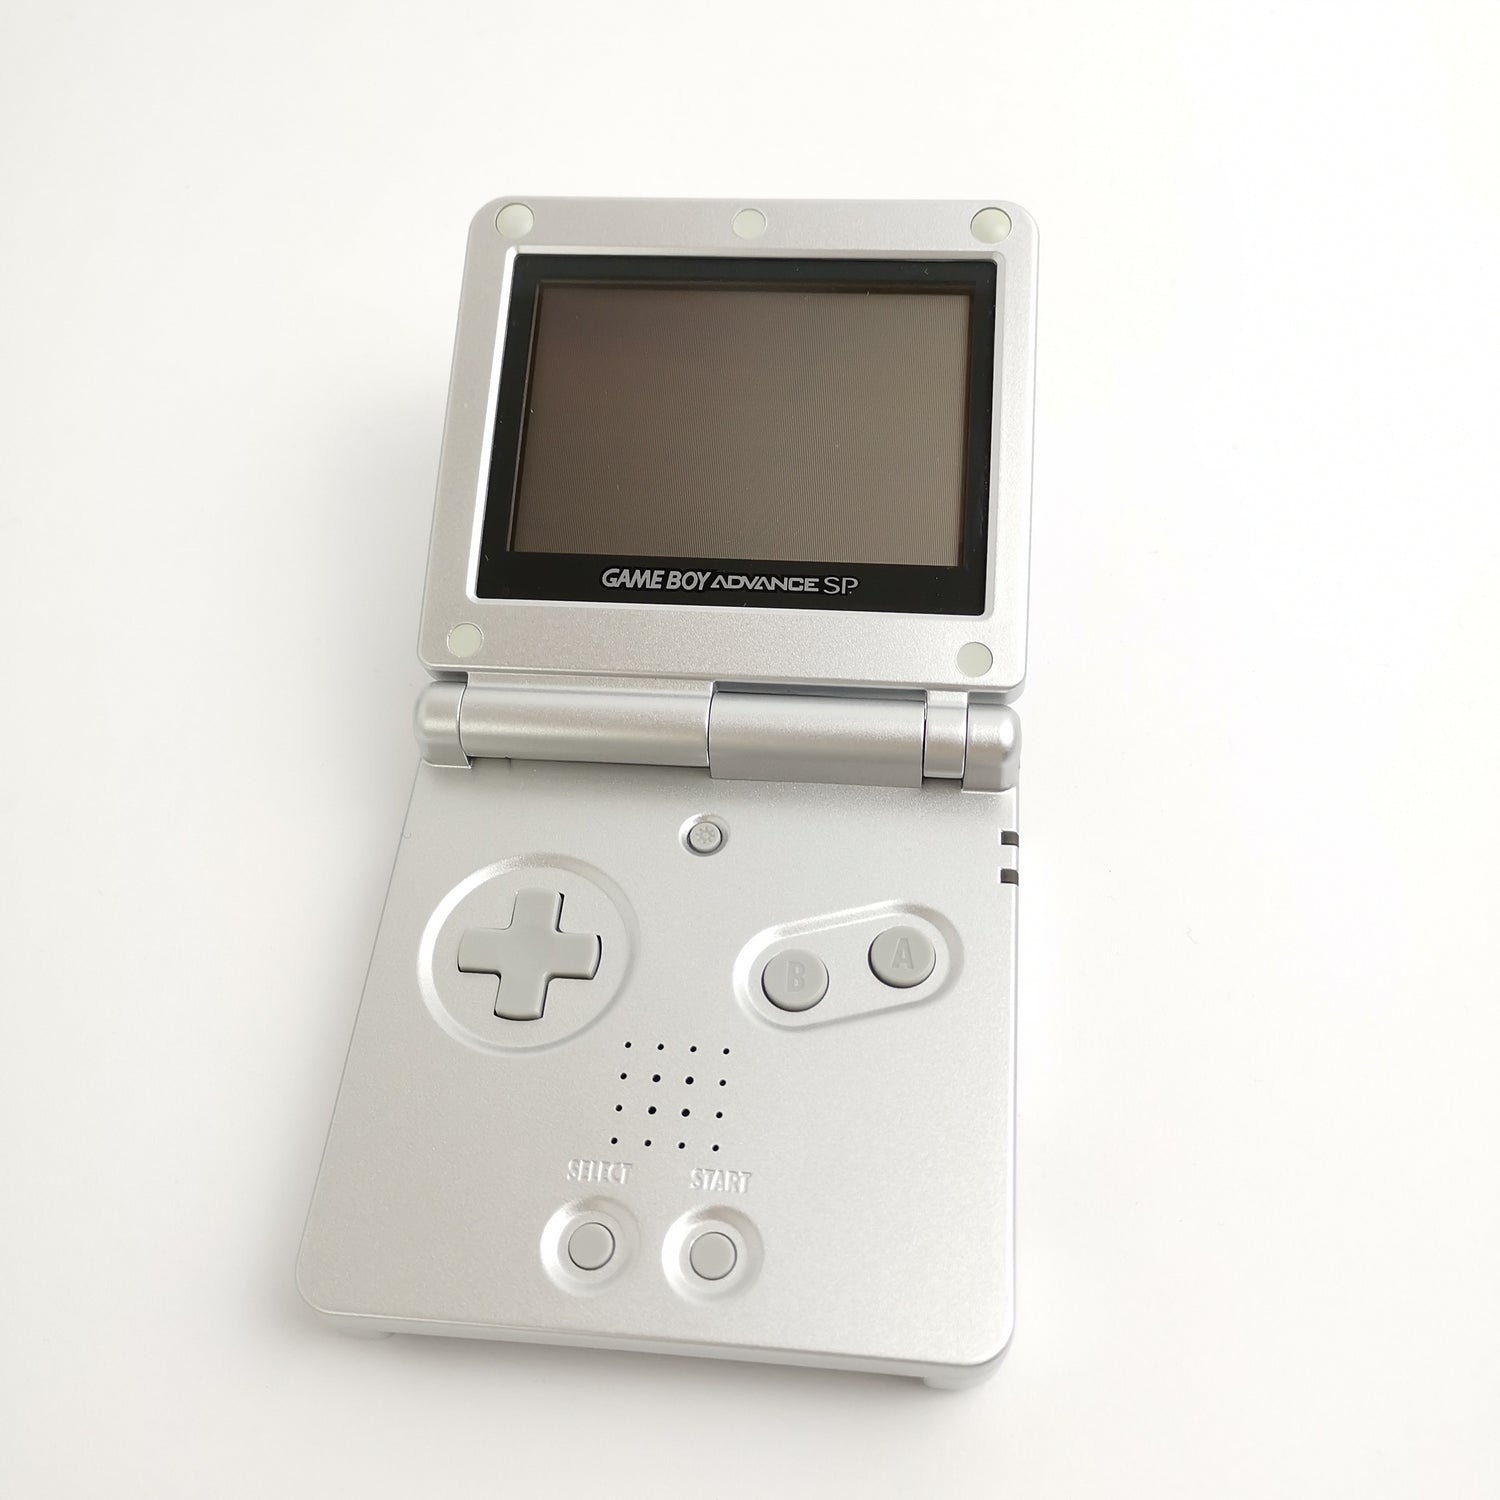 Nintendo Game Boy Advance SP Console / Console - Silver Silver in OVP PAL AGS001